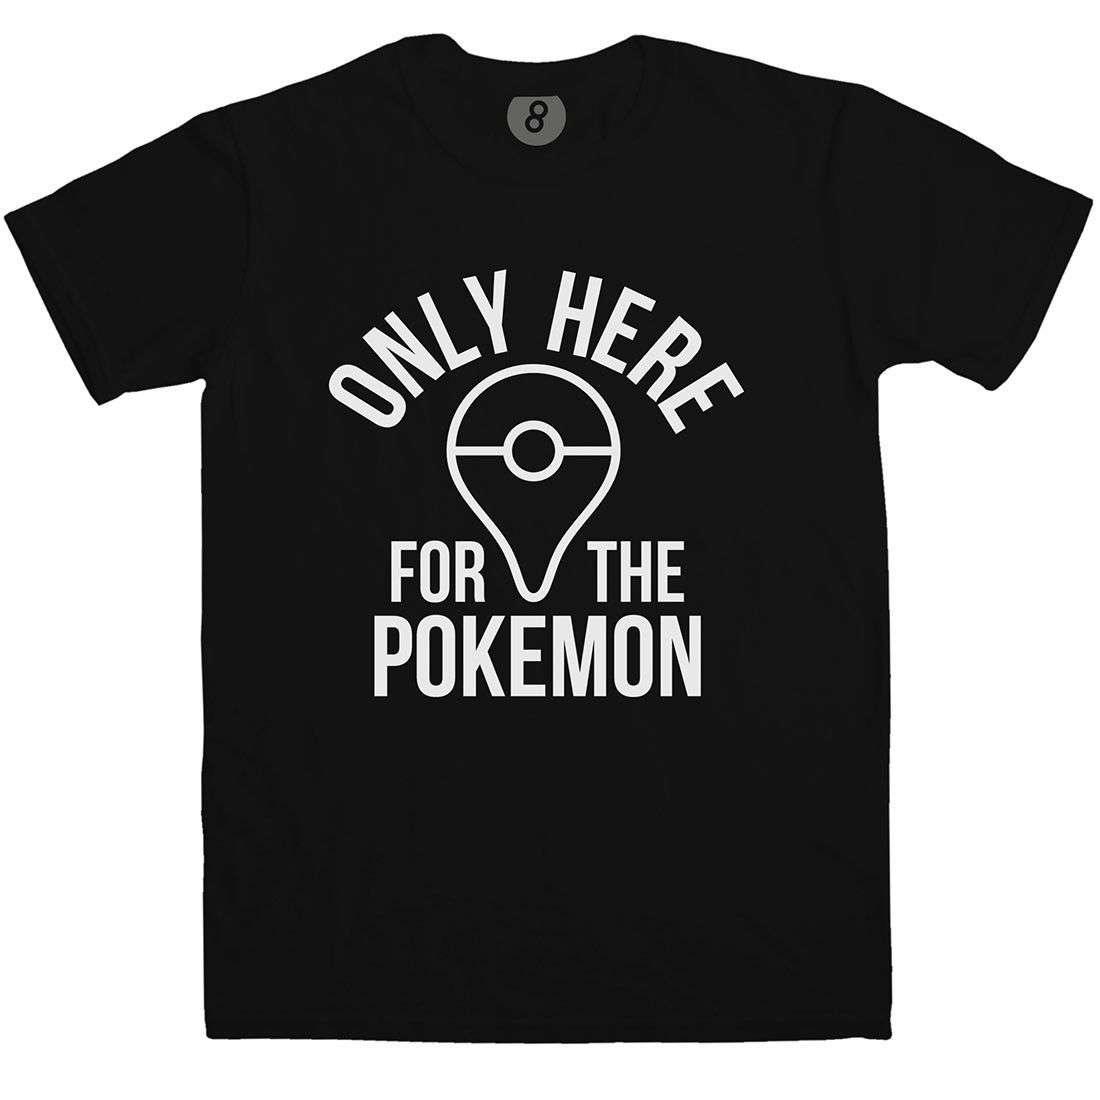 Only here for the Pokemon Graphic T-Shirt For Men 8Ball